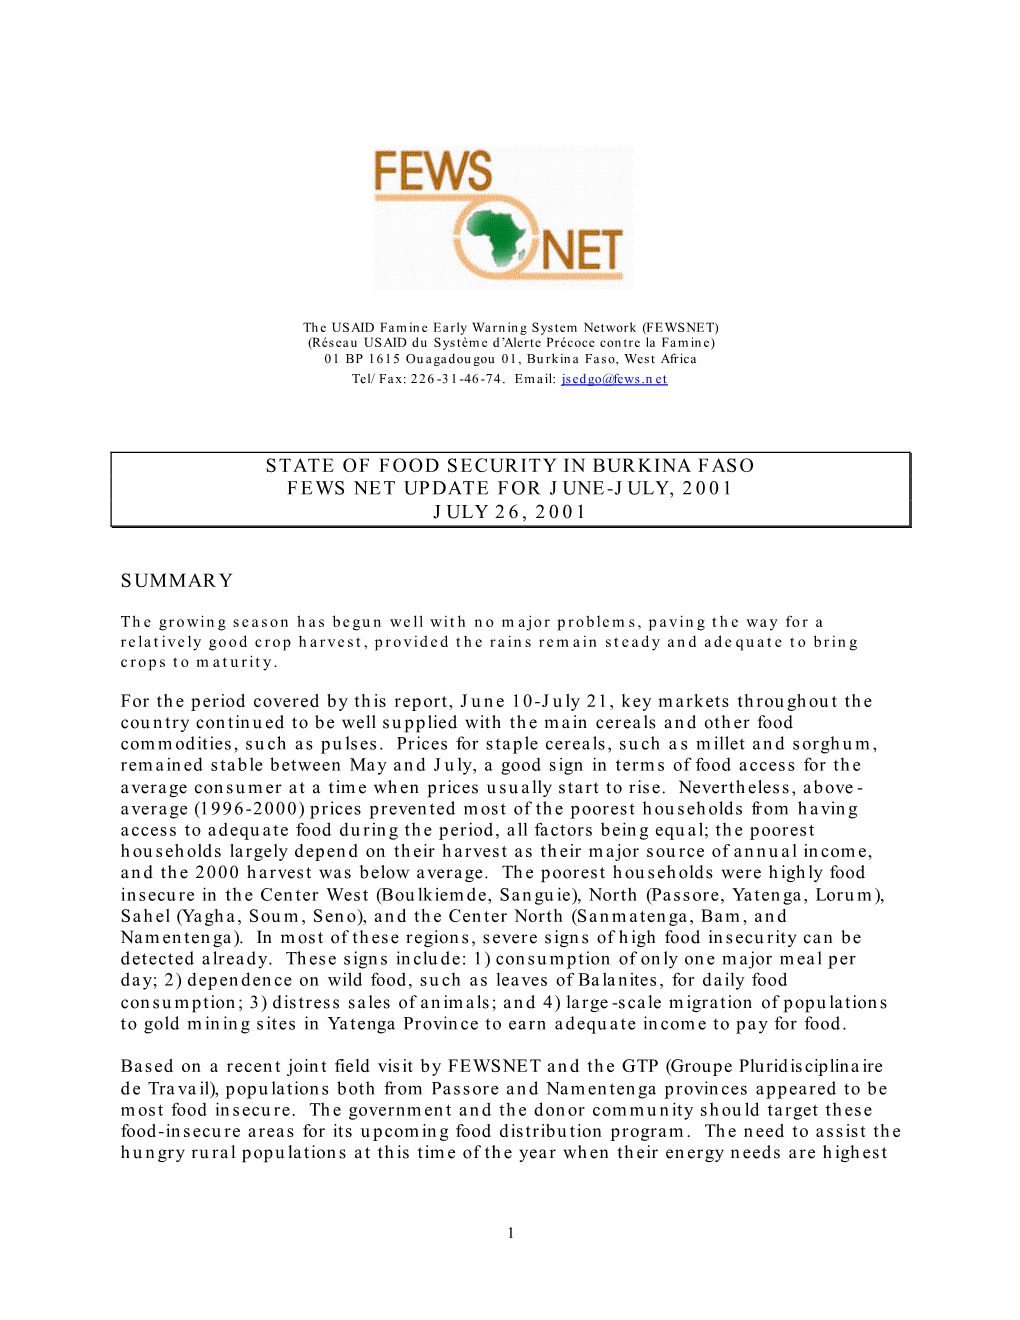 State of Food Security in Burkina Faso Fews Net Update for June-July, 2001 July 26, 2001